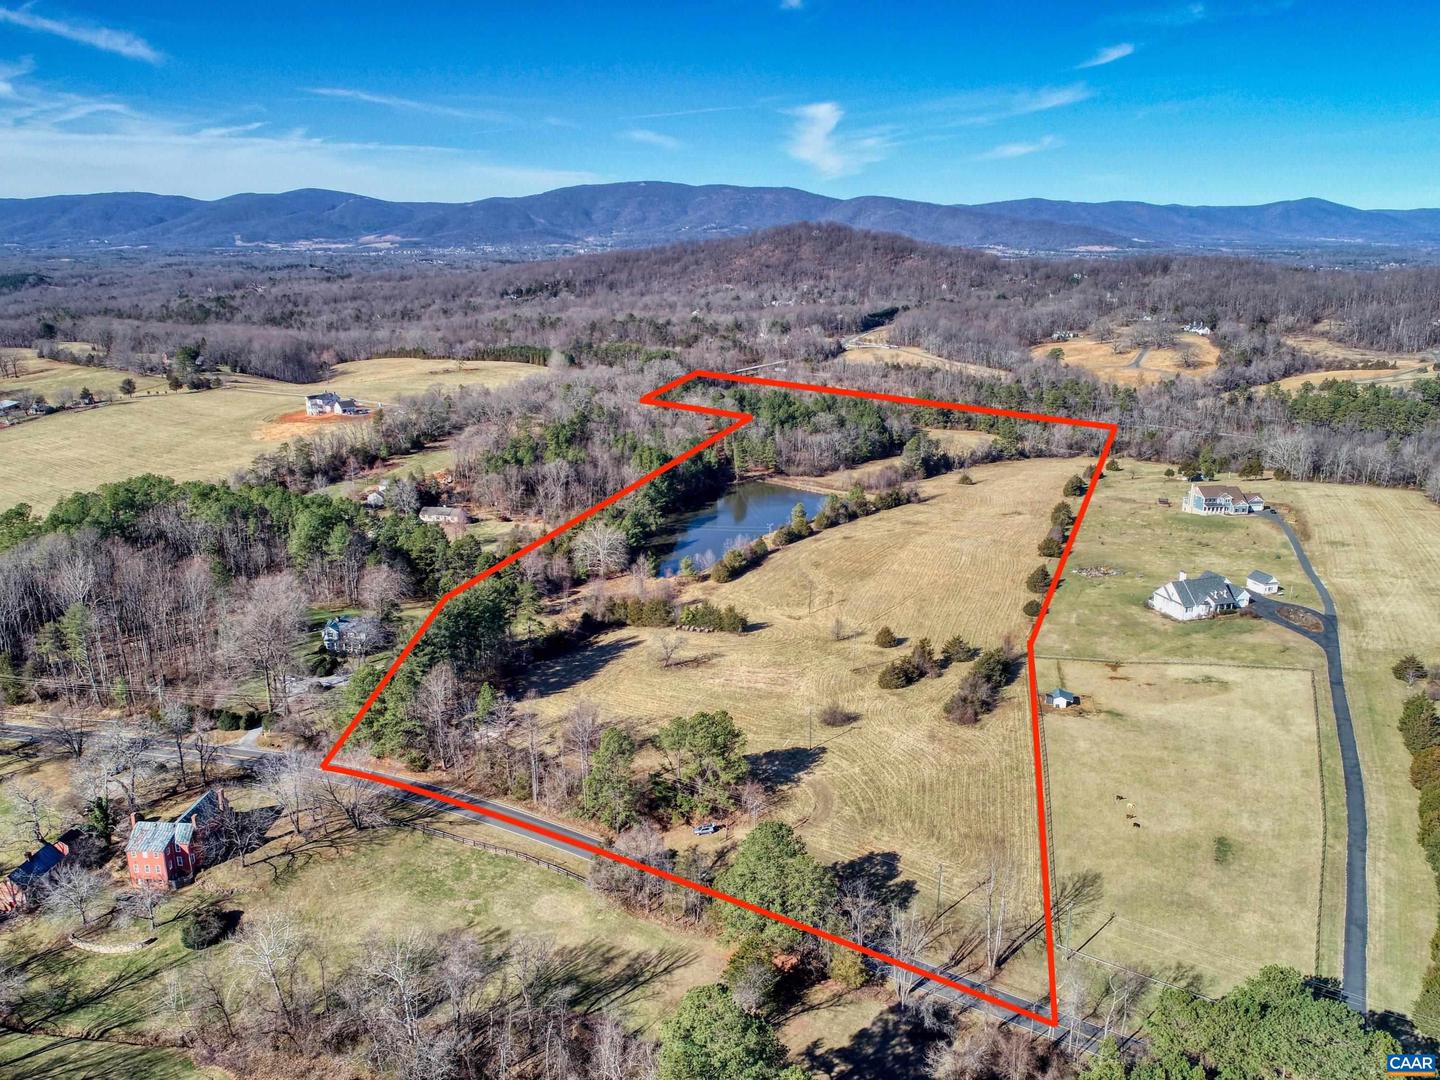 4020 DICK WOODS RD, CHARLOTTESVILLE, Virginia 22903, ,Land,For sale,4020 DICK WOODS RD,648341 MLS # 648341